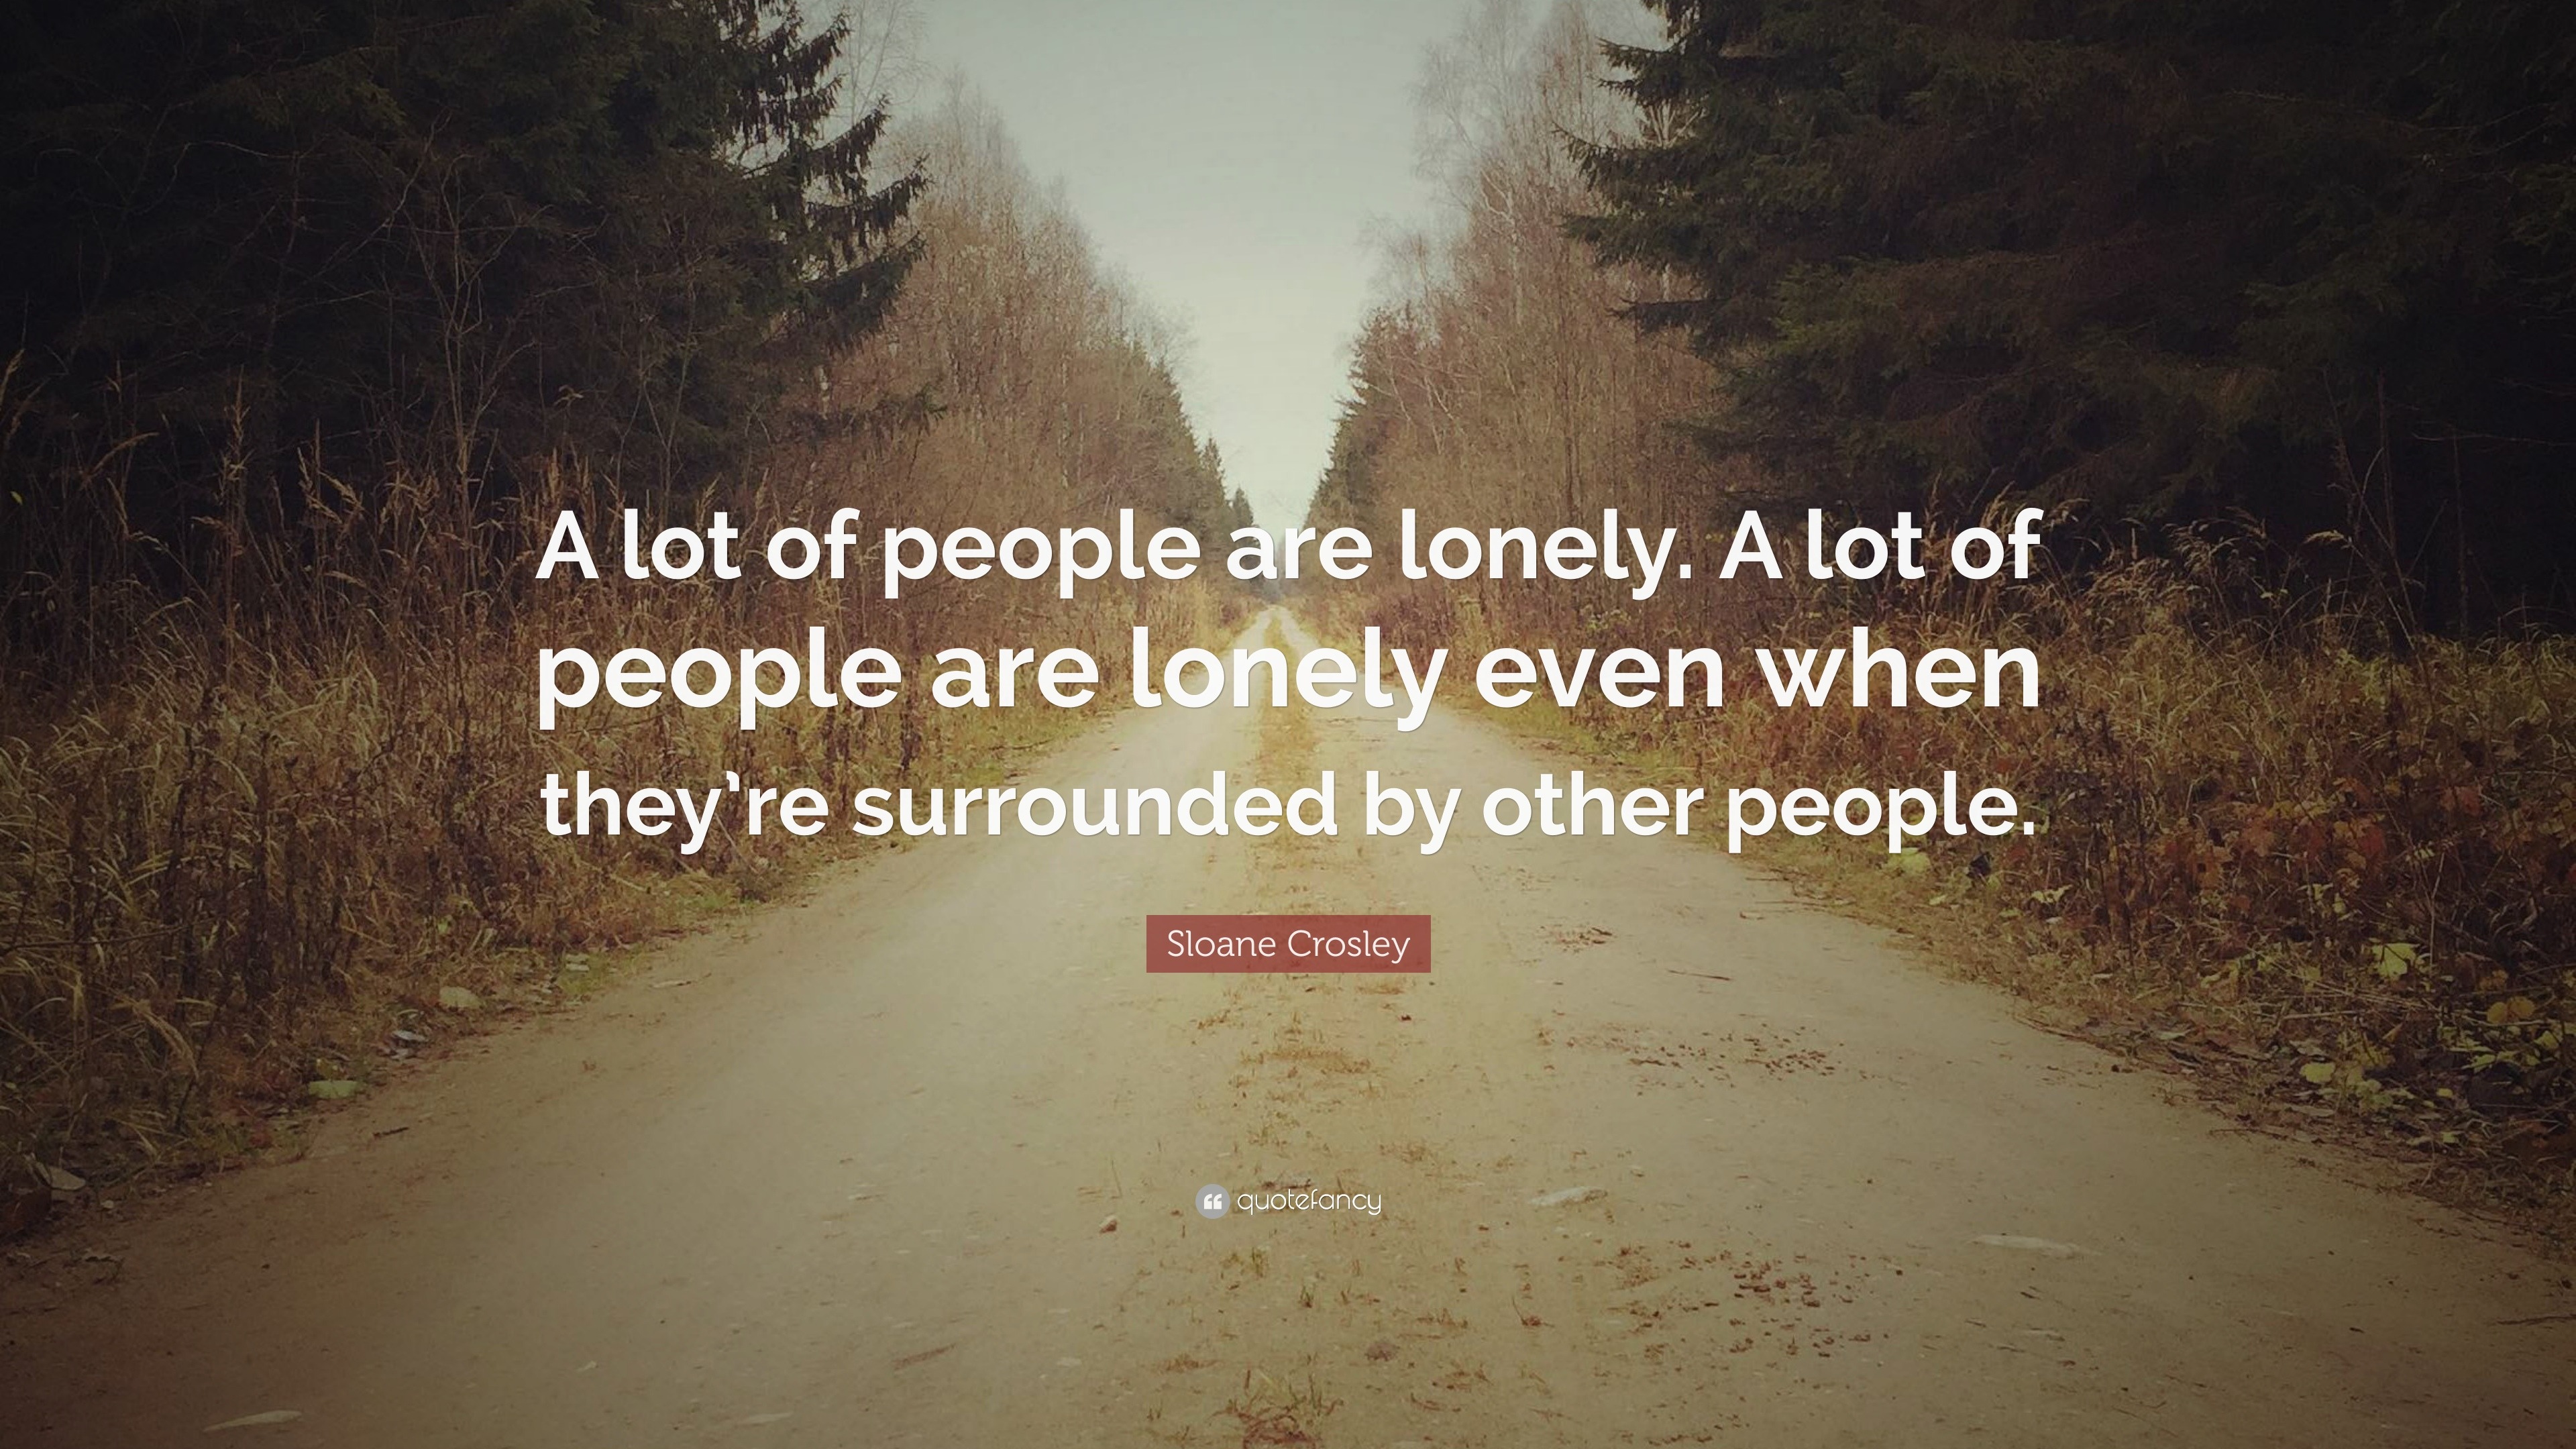 Sloane Crosley Quote: “A lot of people are lonely. A lot of people are ...